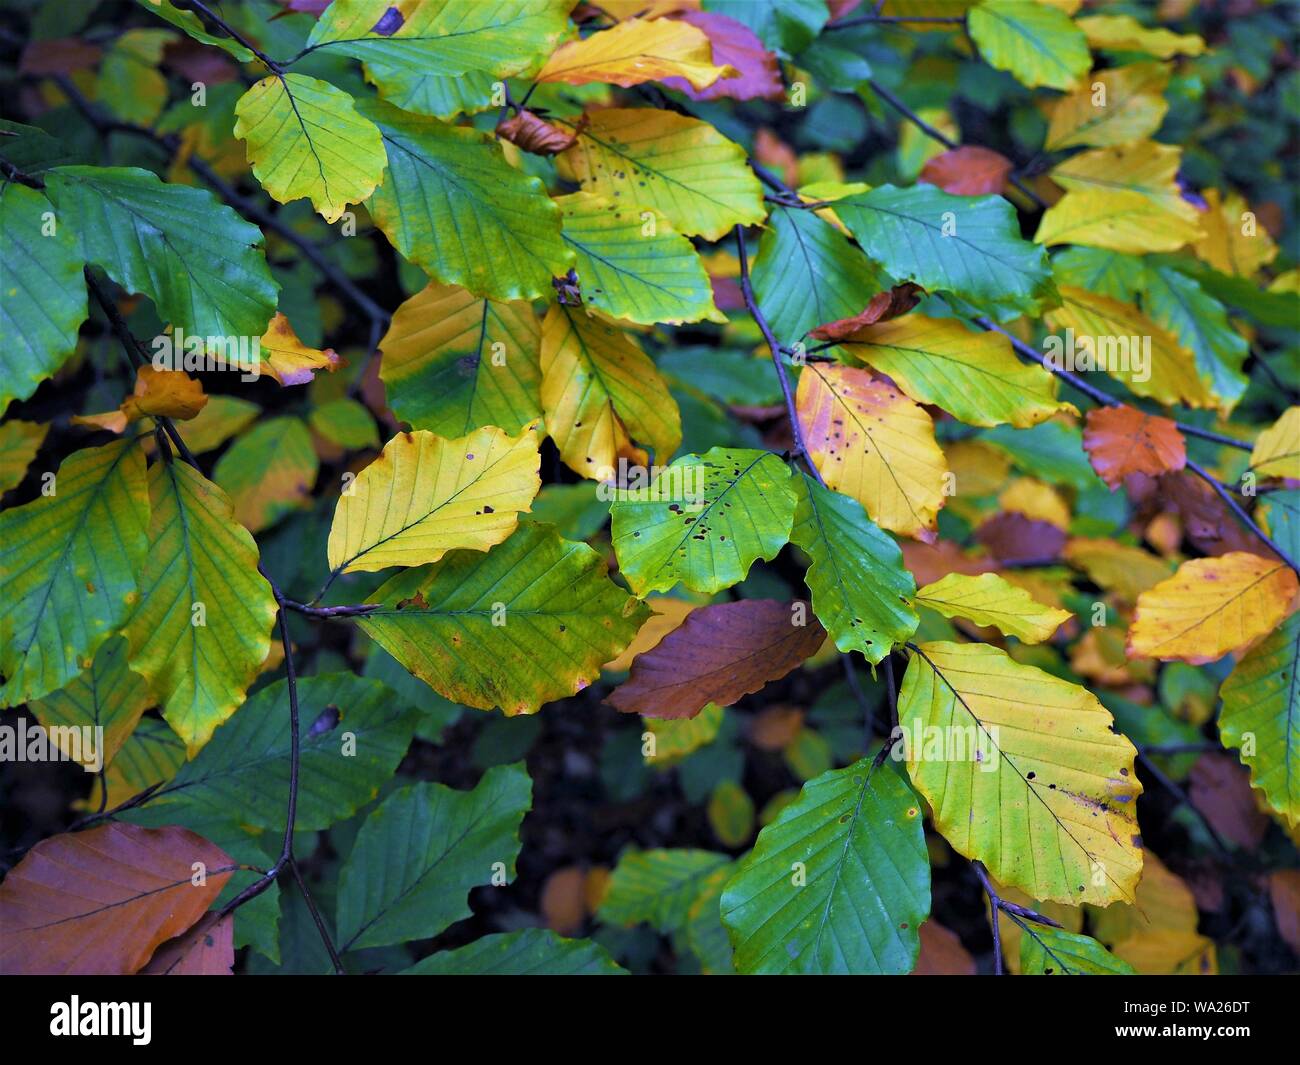 Green, yellow and brown autumn beech tree leaves closeup Stock Photo